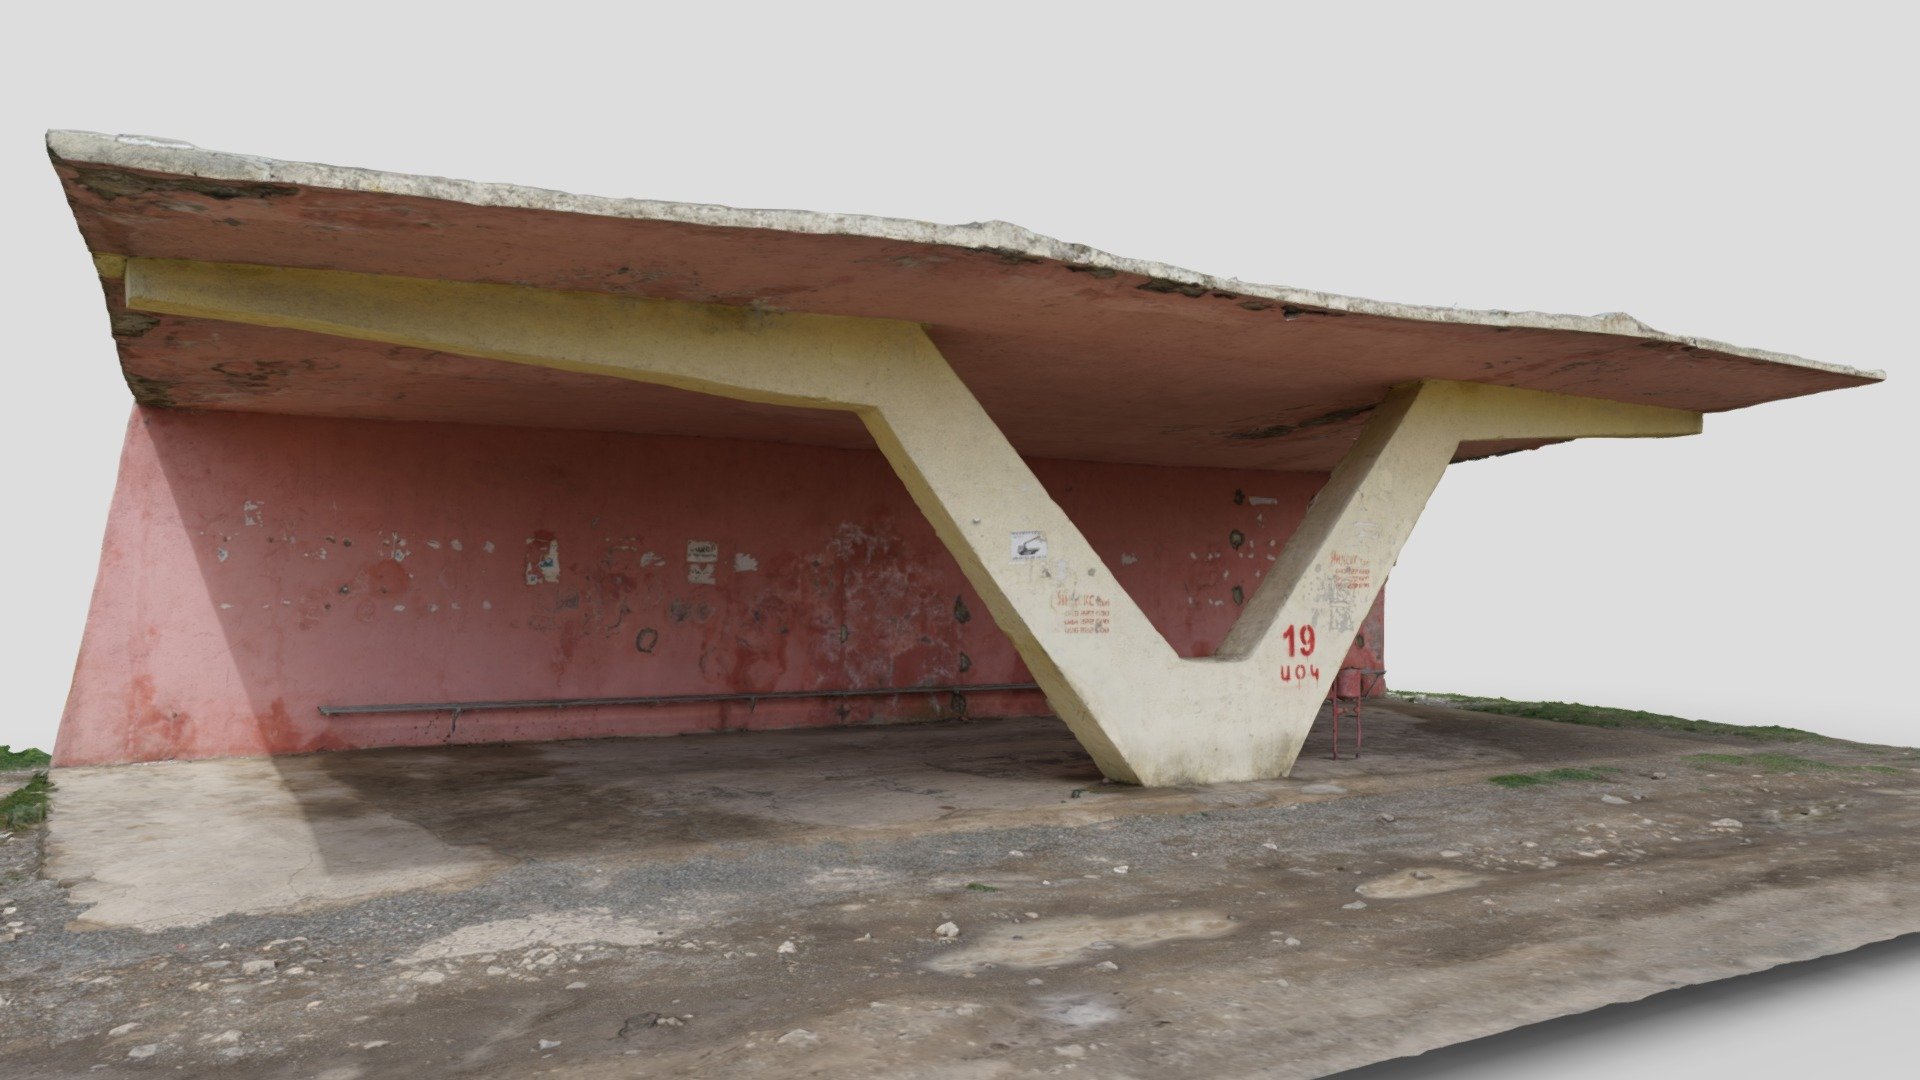 A (still in use?) soviet bus stop in the village of Argel, Armenia.

Images captured with a Sony A7rii and Mavic 2 Pro, reconstructed using RealityCapture. Model is scaled 1:1 - Soviet Bus Stop - Argel, Armenia - Download Free 3D model by Azad Balabanian (@azadbal) 3d model